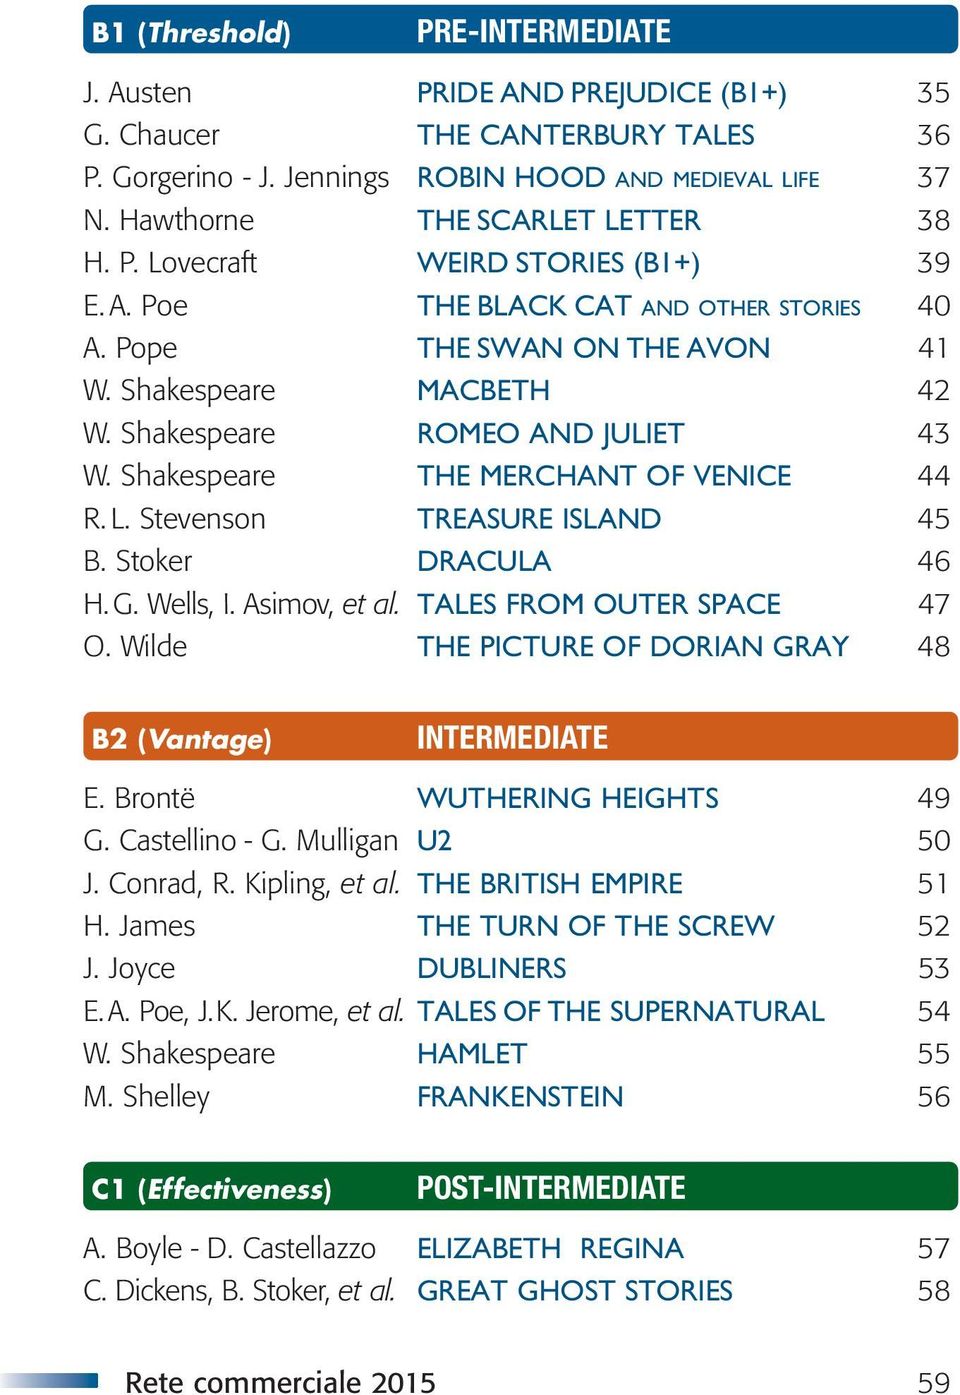 Shakespeare ROMEO AND JULIET 43 W. Shakespeare THE MERCHANT OF VENICE 44 R. L. Stevenson TREASURE ISLAND 45 B. Stoker DRACULA 46 H. G. Wells, I. Asimov, et al. TALES FROM OUTER SPACE 47 O.